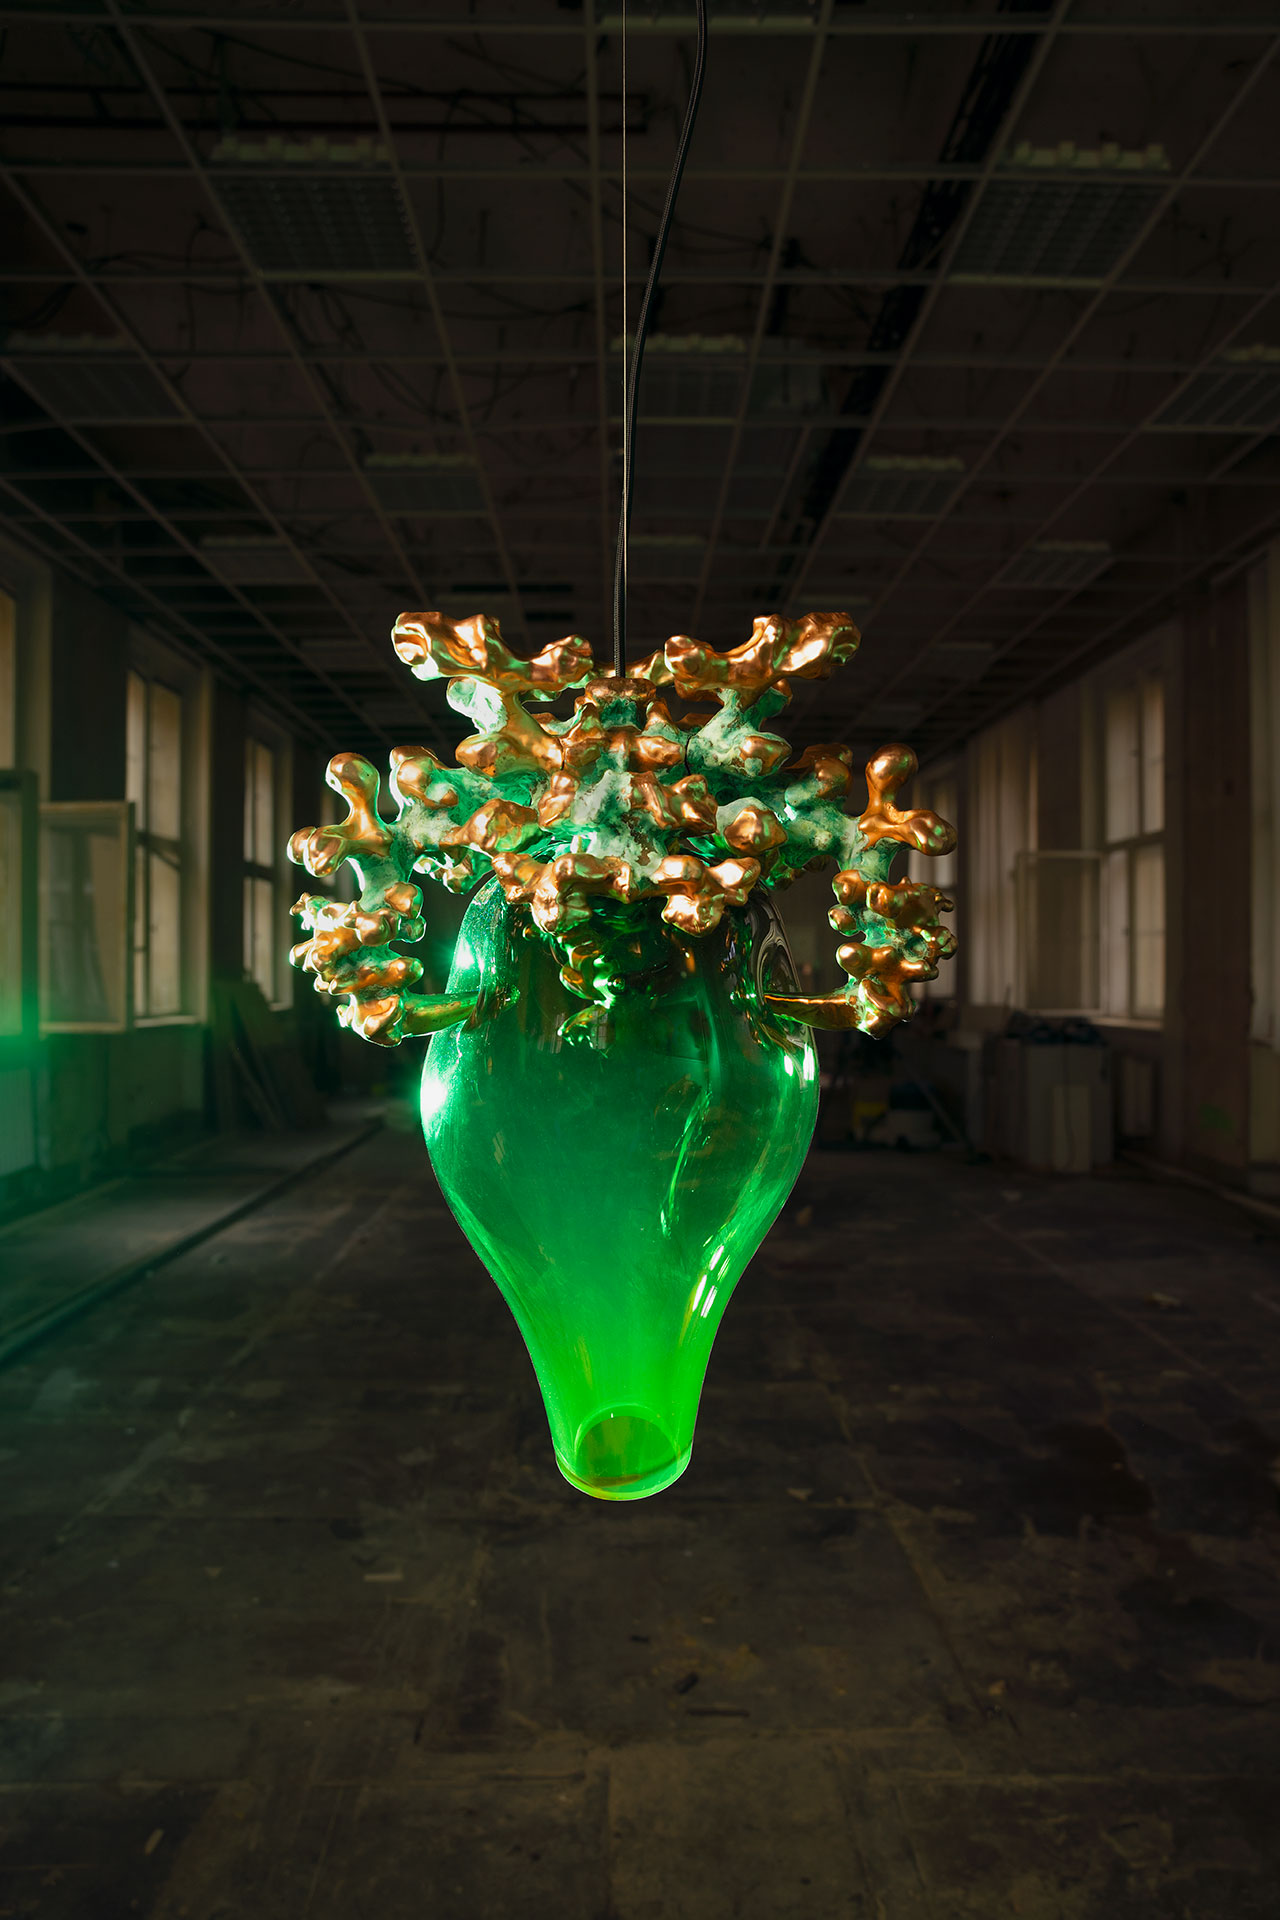 Abiogenesis lighting (Designblok Cosmos), objects for The Bloom of Bones exhibition (Galerie Kuzebauch) and Thistle Stool